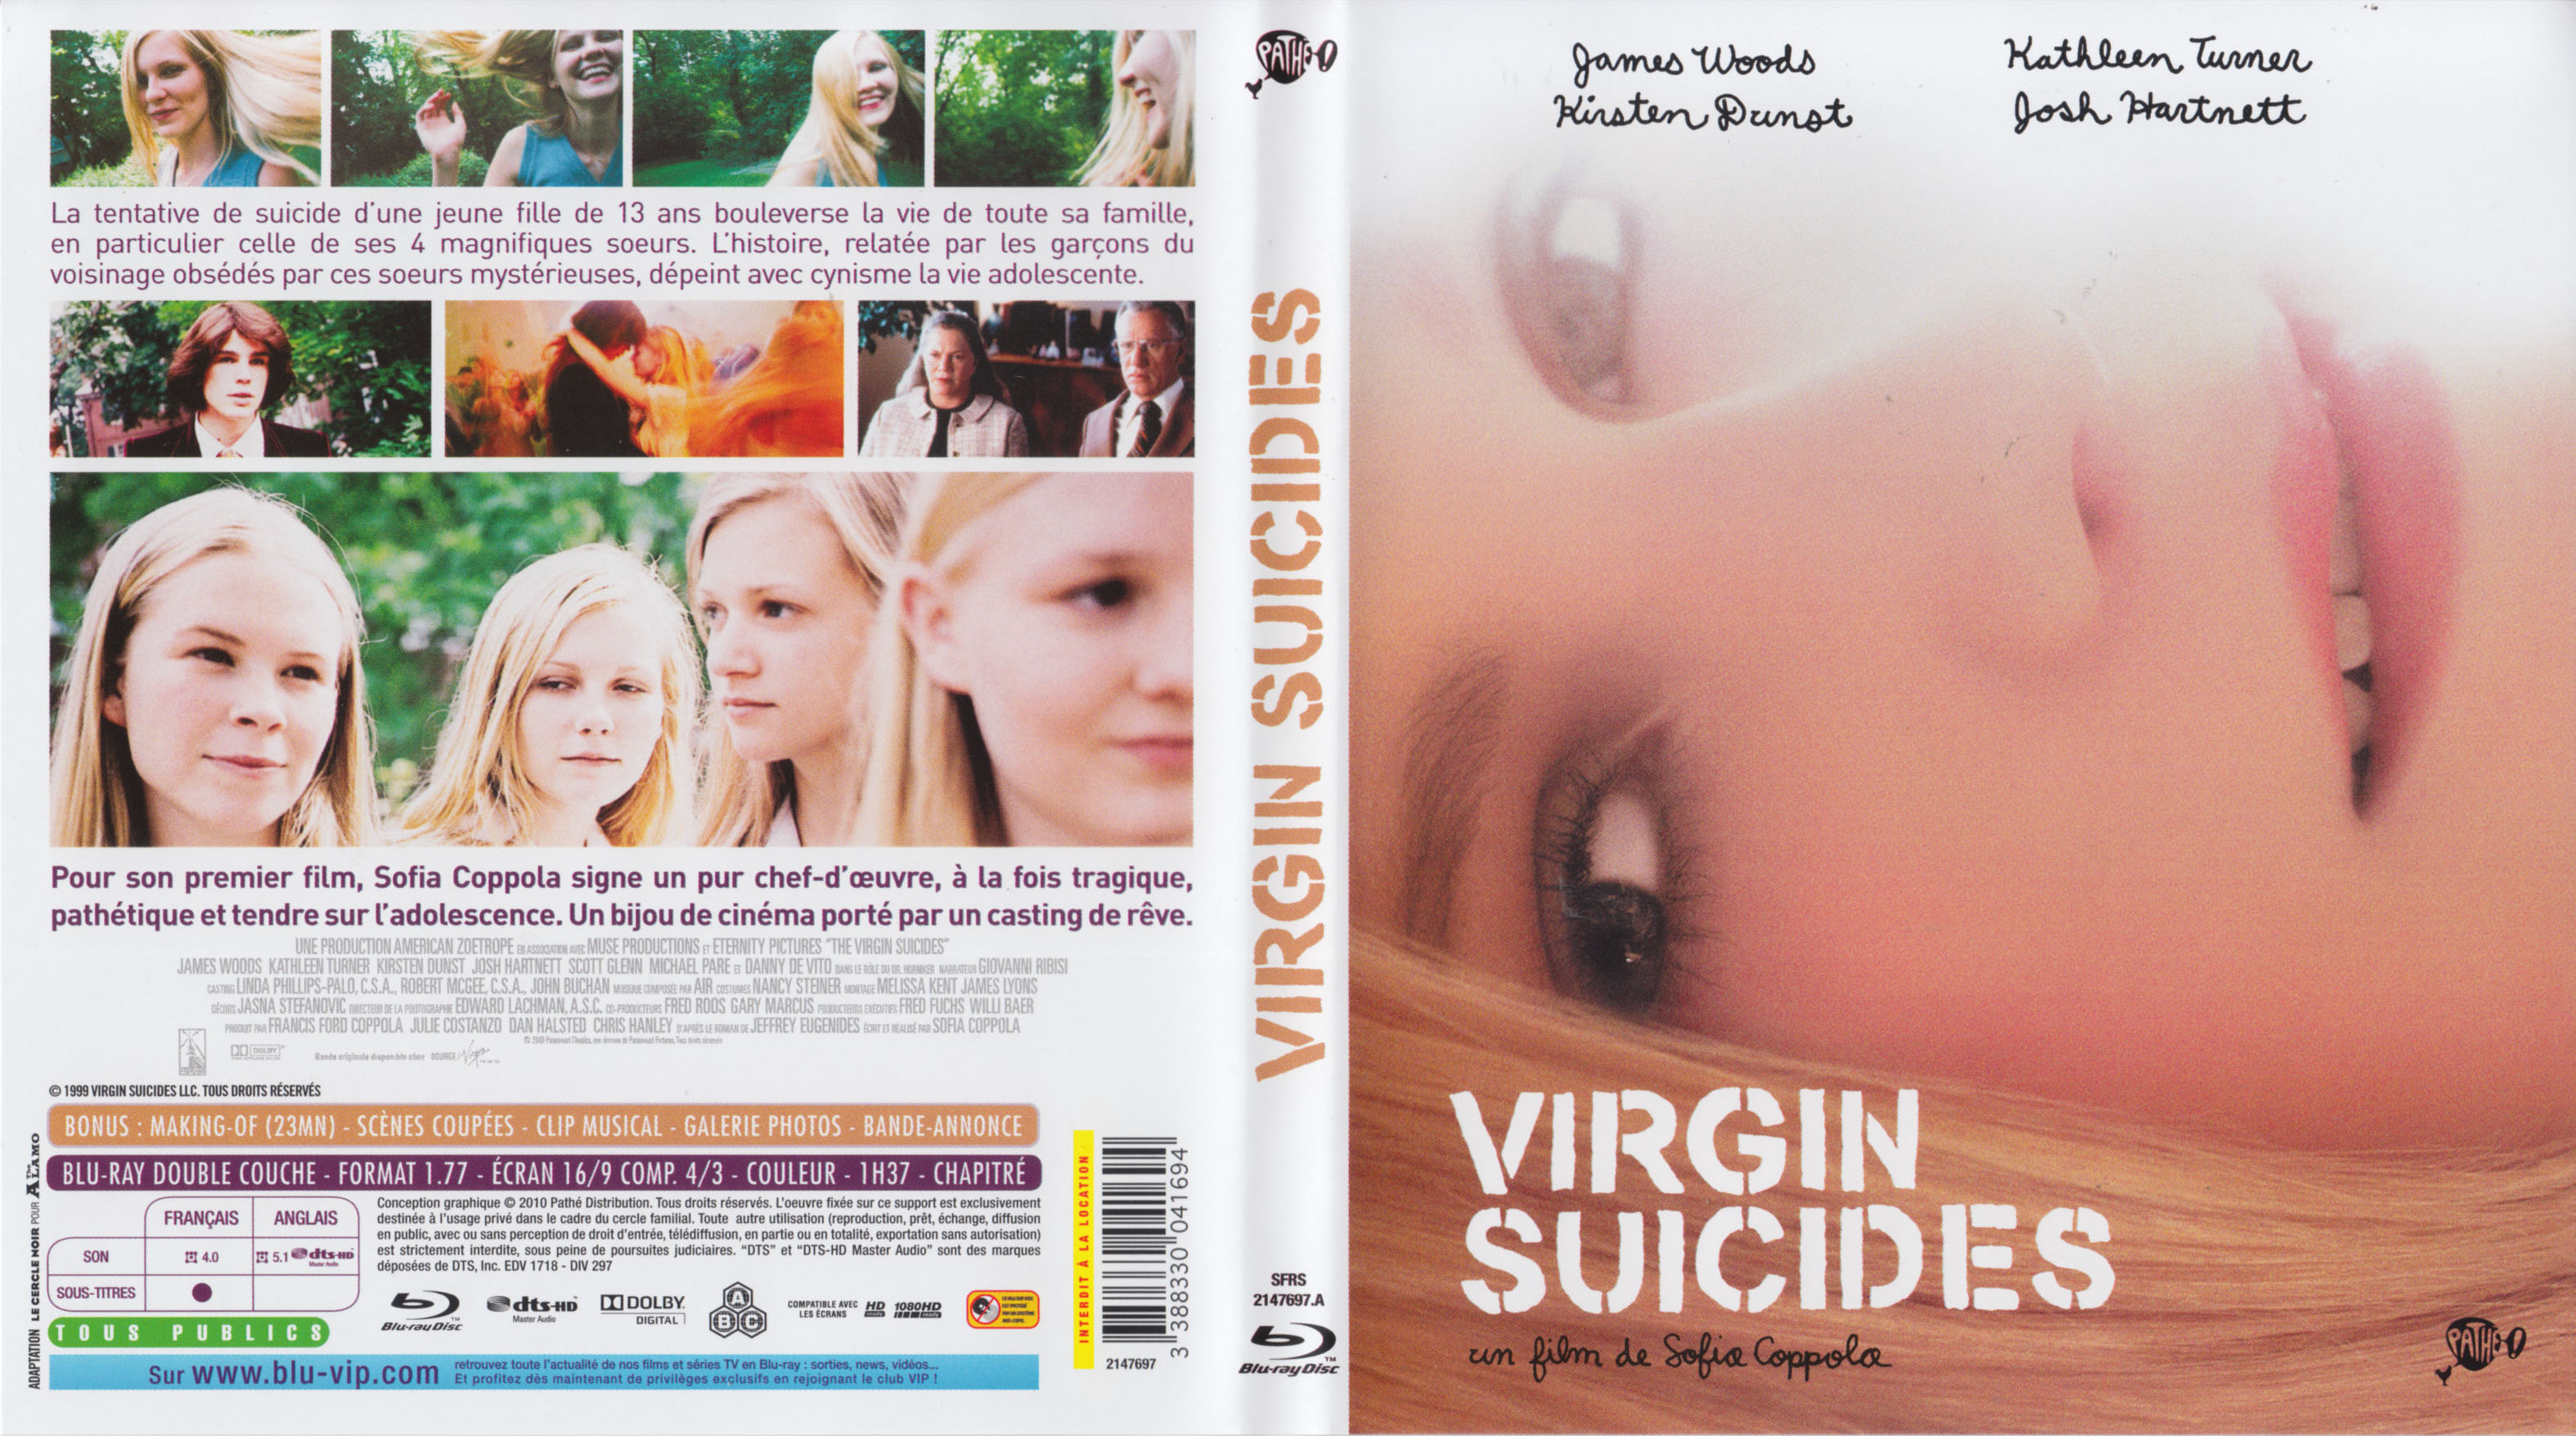 Jaquette DVD Virgin suicides (BLU-RAY)